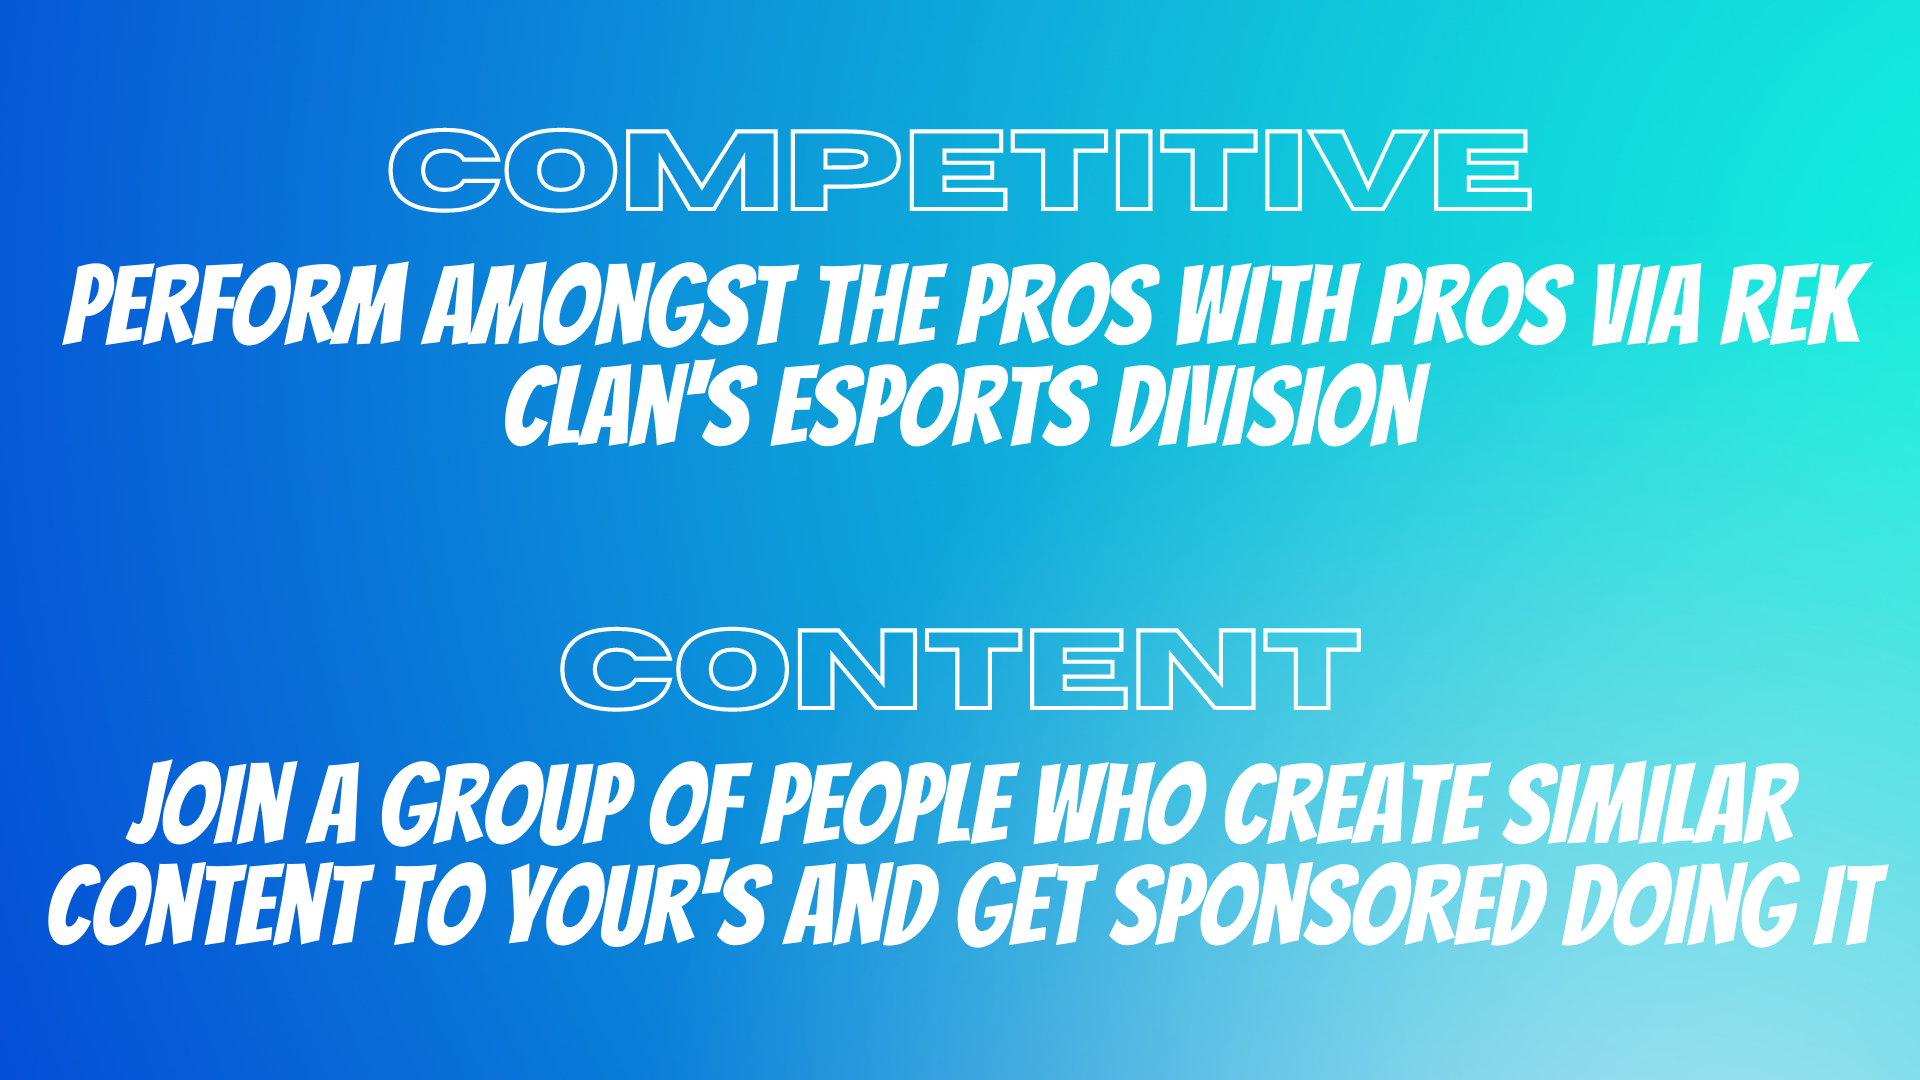 COMPETITIVE perform amongst the pros with pros via rek clan's esports division CONTENT join a group of people who create similar content to your's and get sponsored doing it